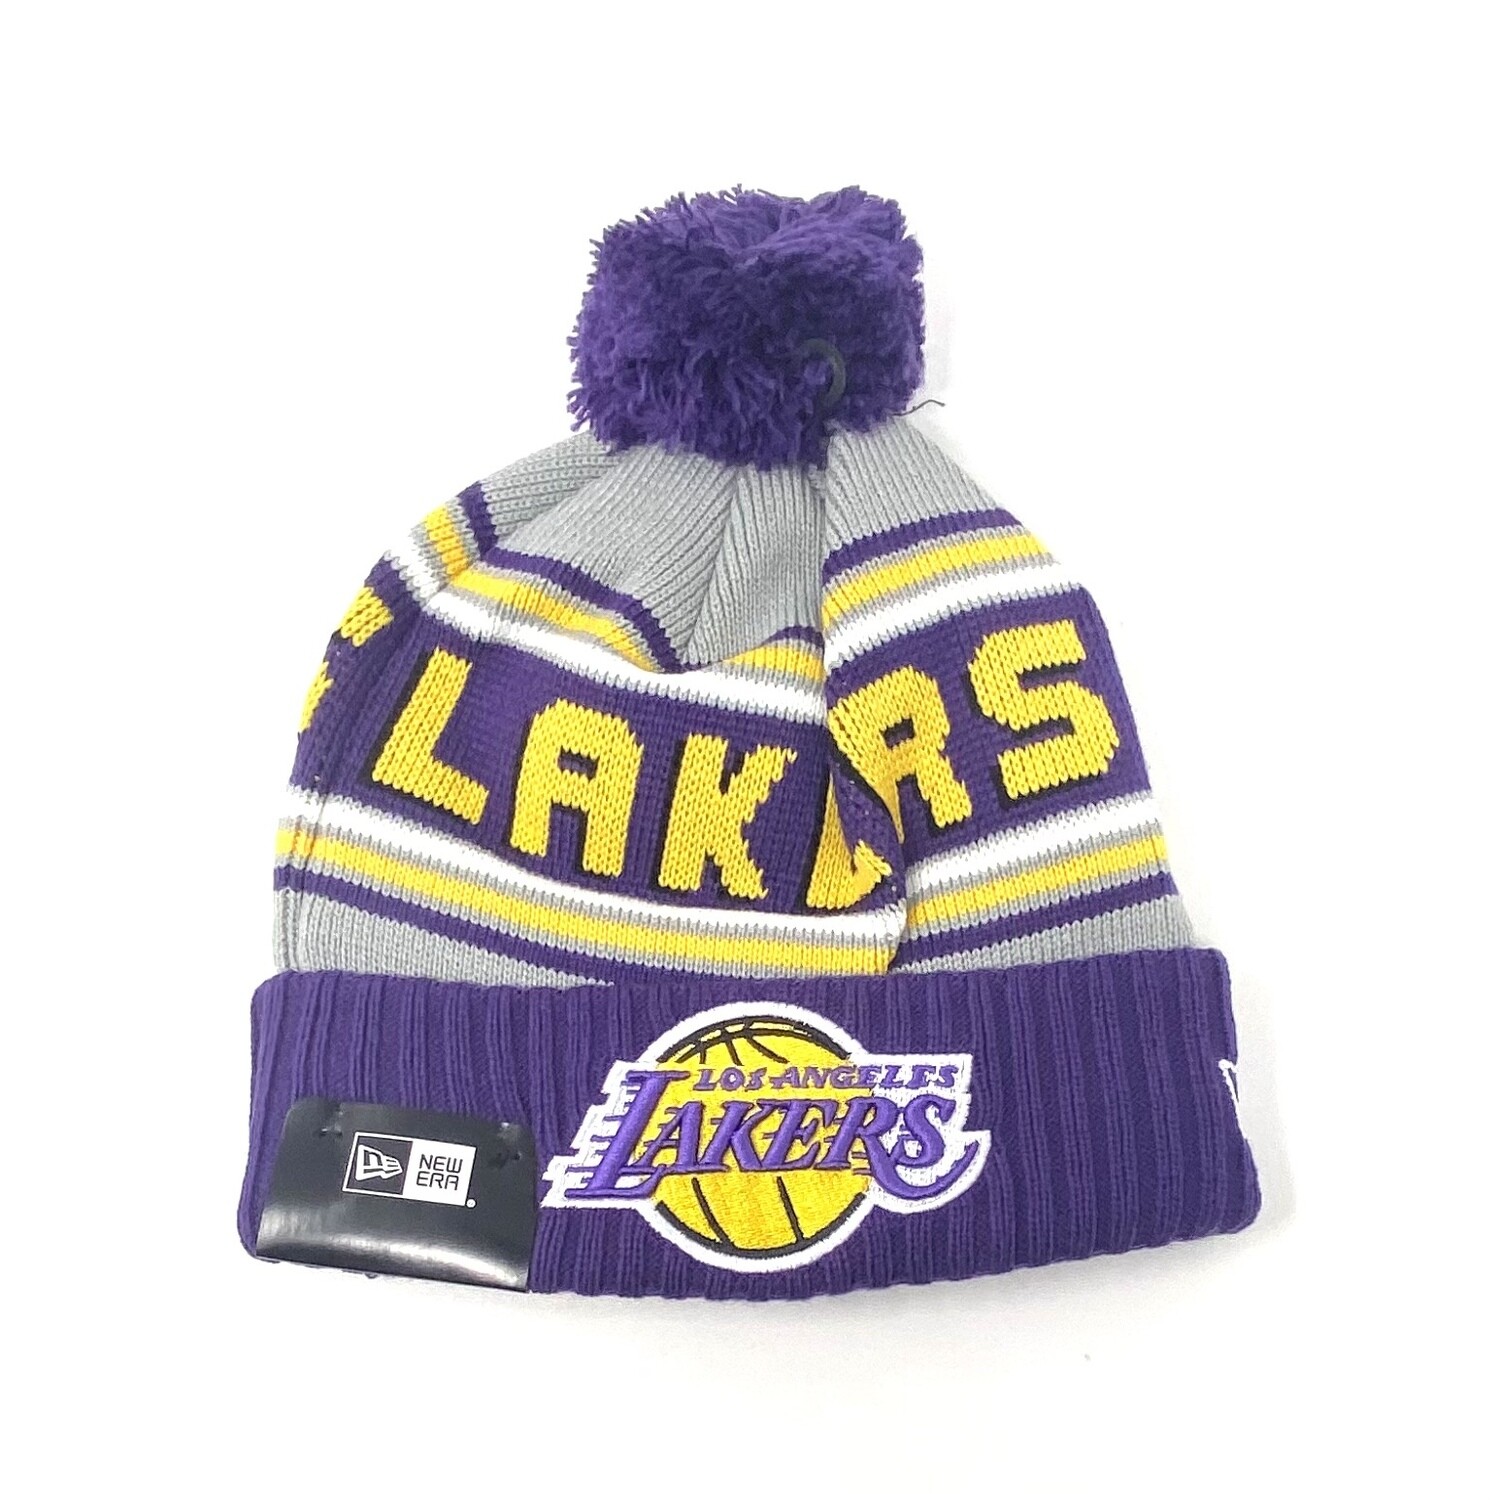 Los Angeles Lakers Beanie Hat by New Era